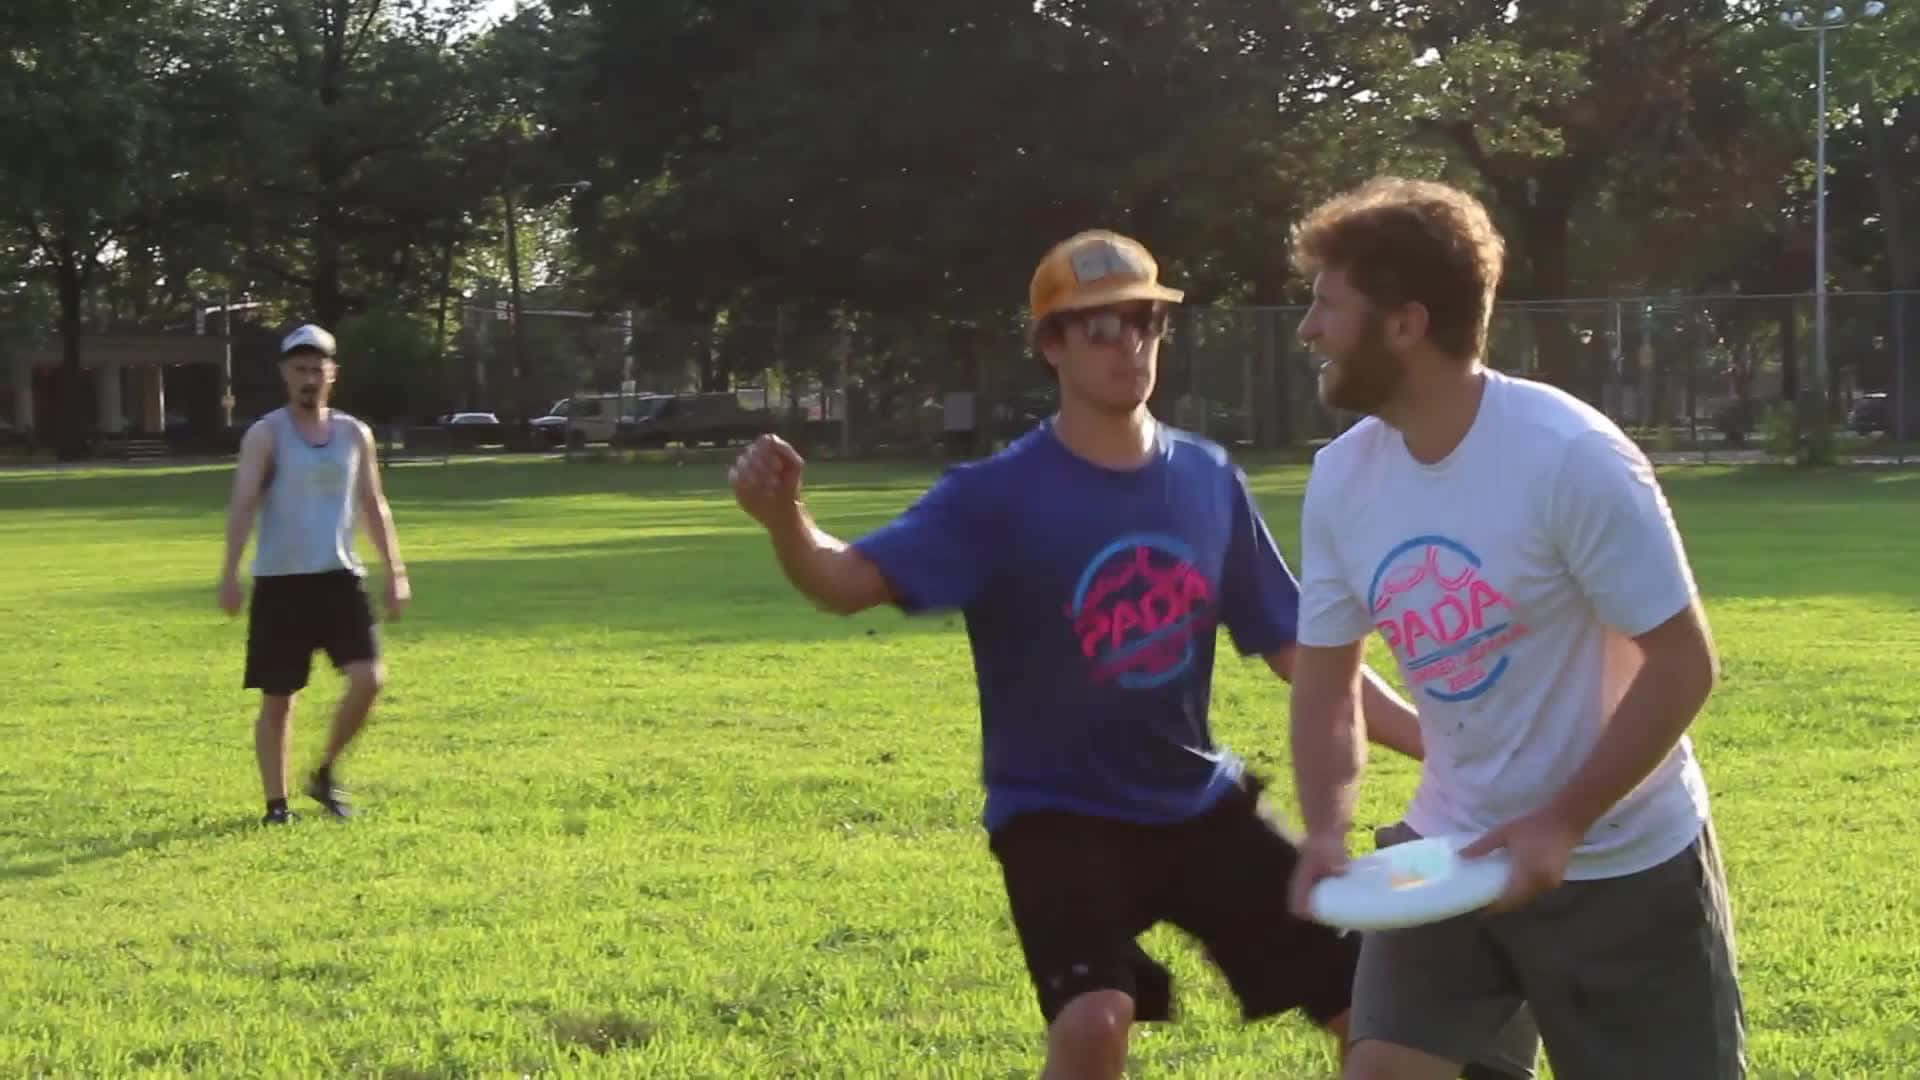 Players On The Field 1920x1080 Ultimate Frisbee Background